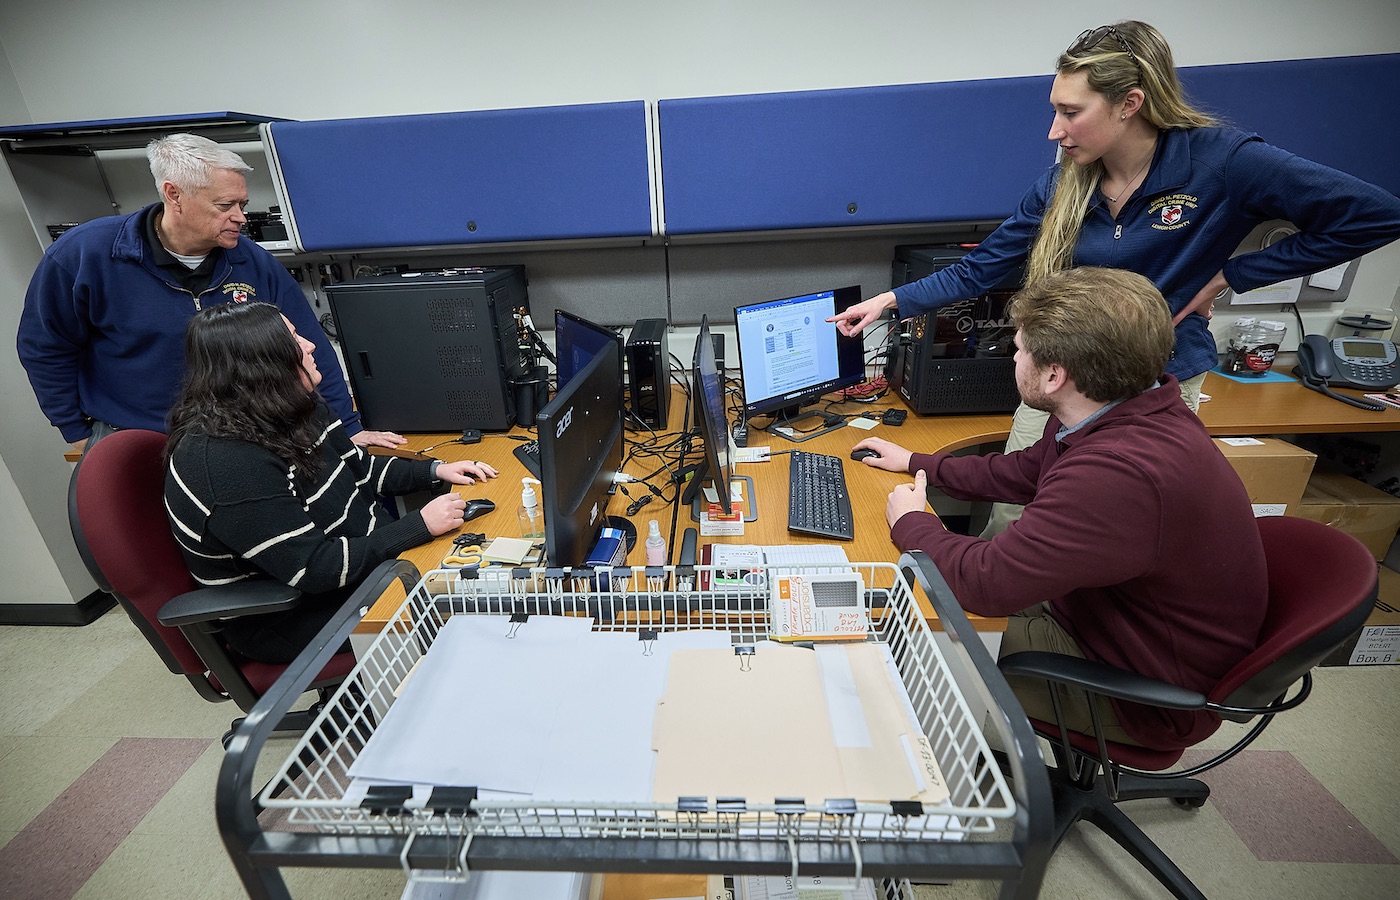 Students and employees of the Petzold Lab look at computer screens